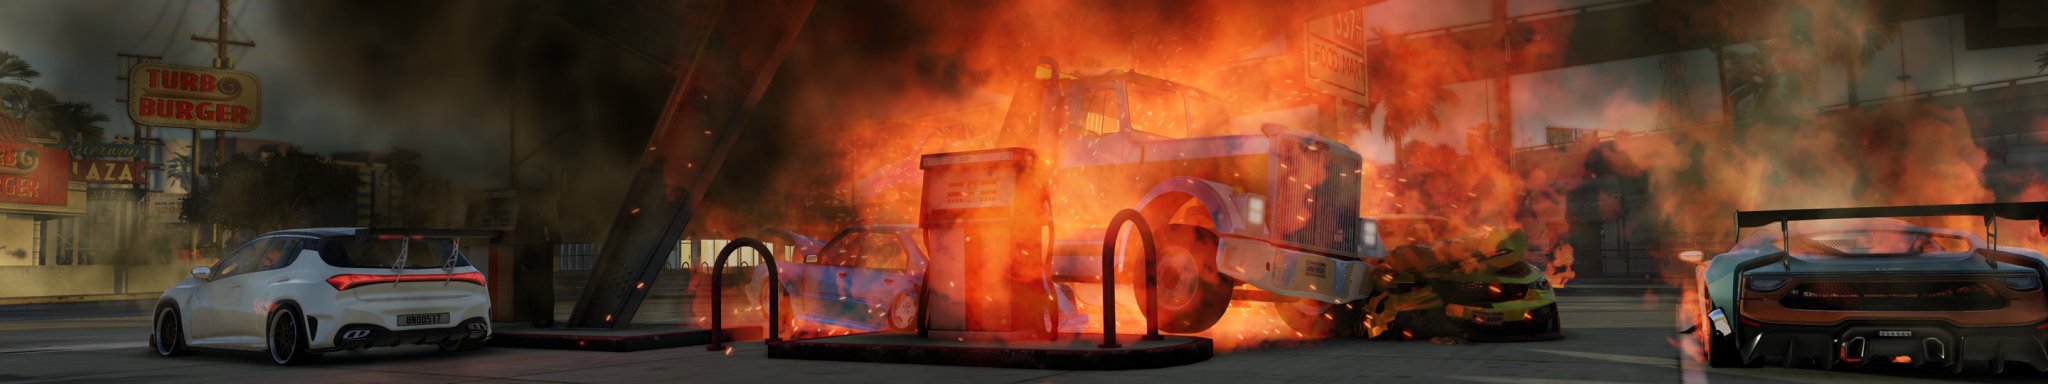 0c BeamNG Multiple VEHICLE Gas Station FIRE EXPLOSION copy.jpg